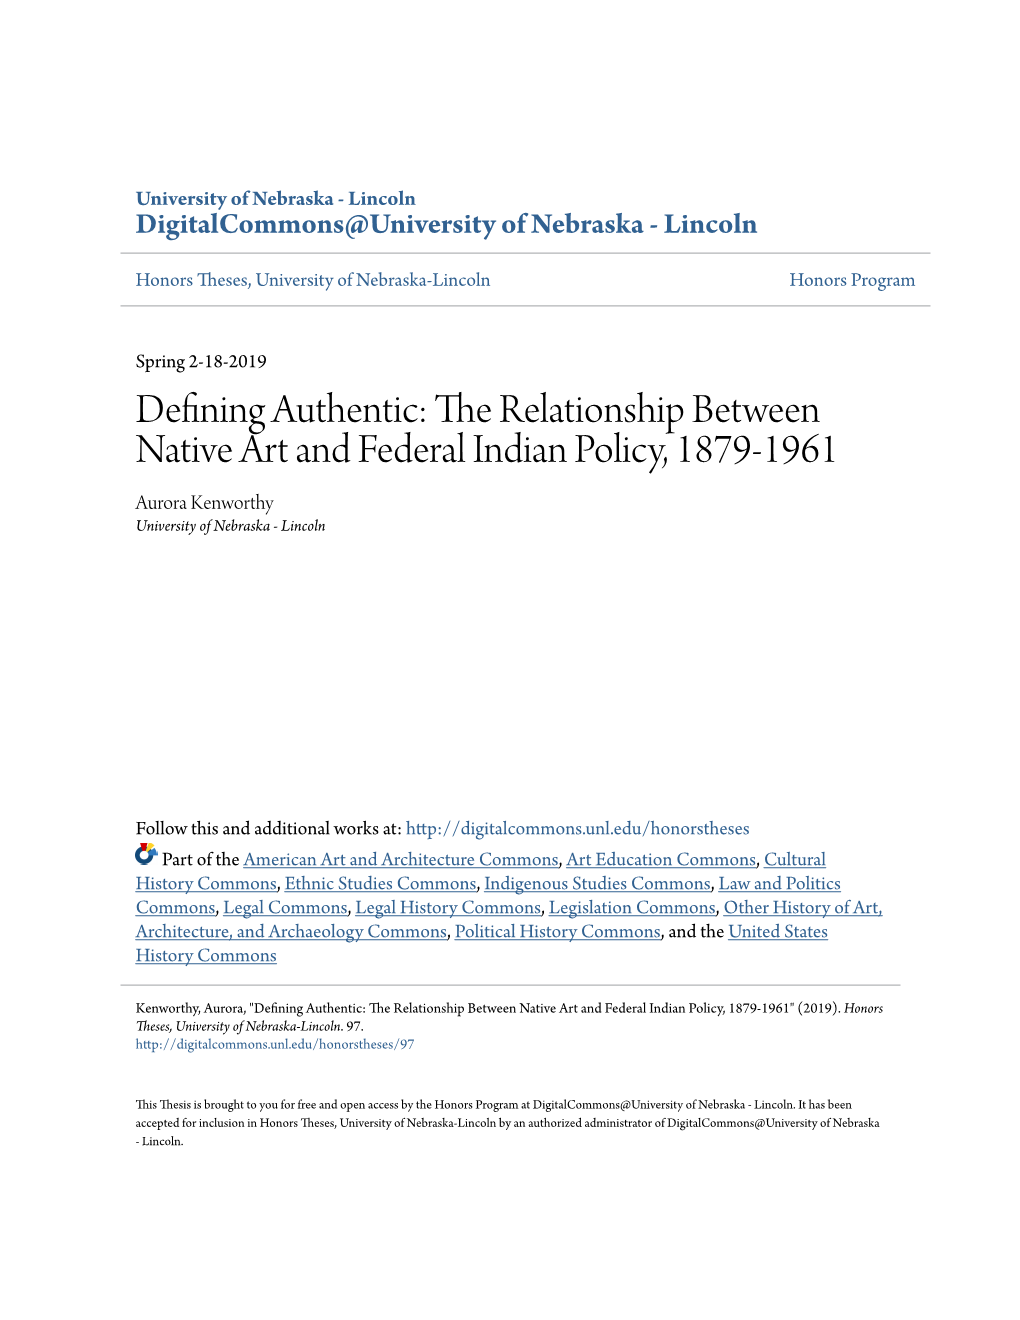 The Relationship Between Native Art and Federal Indian Policy, 1879-1961 Aurora Kenworthy University of Nebraska - Lincoln